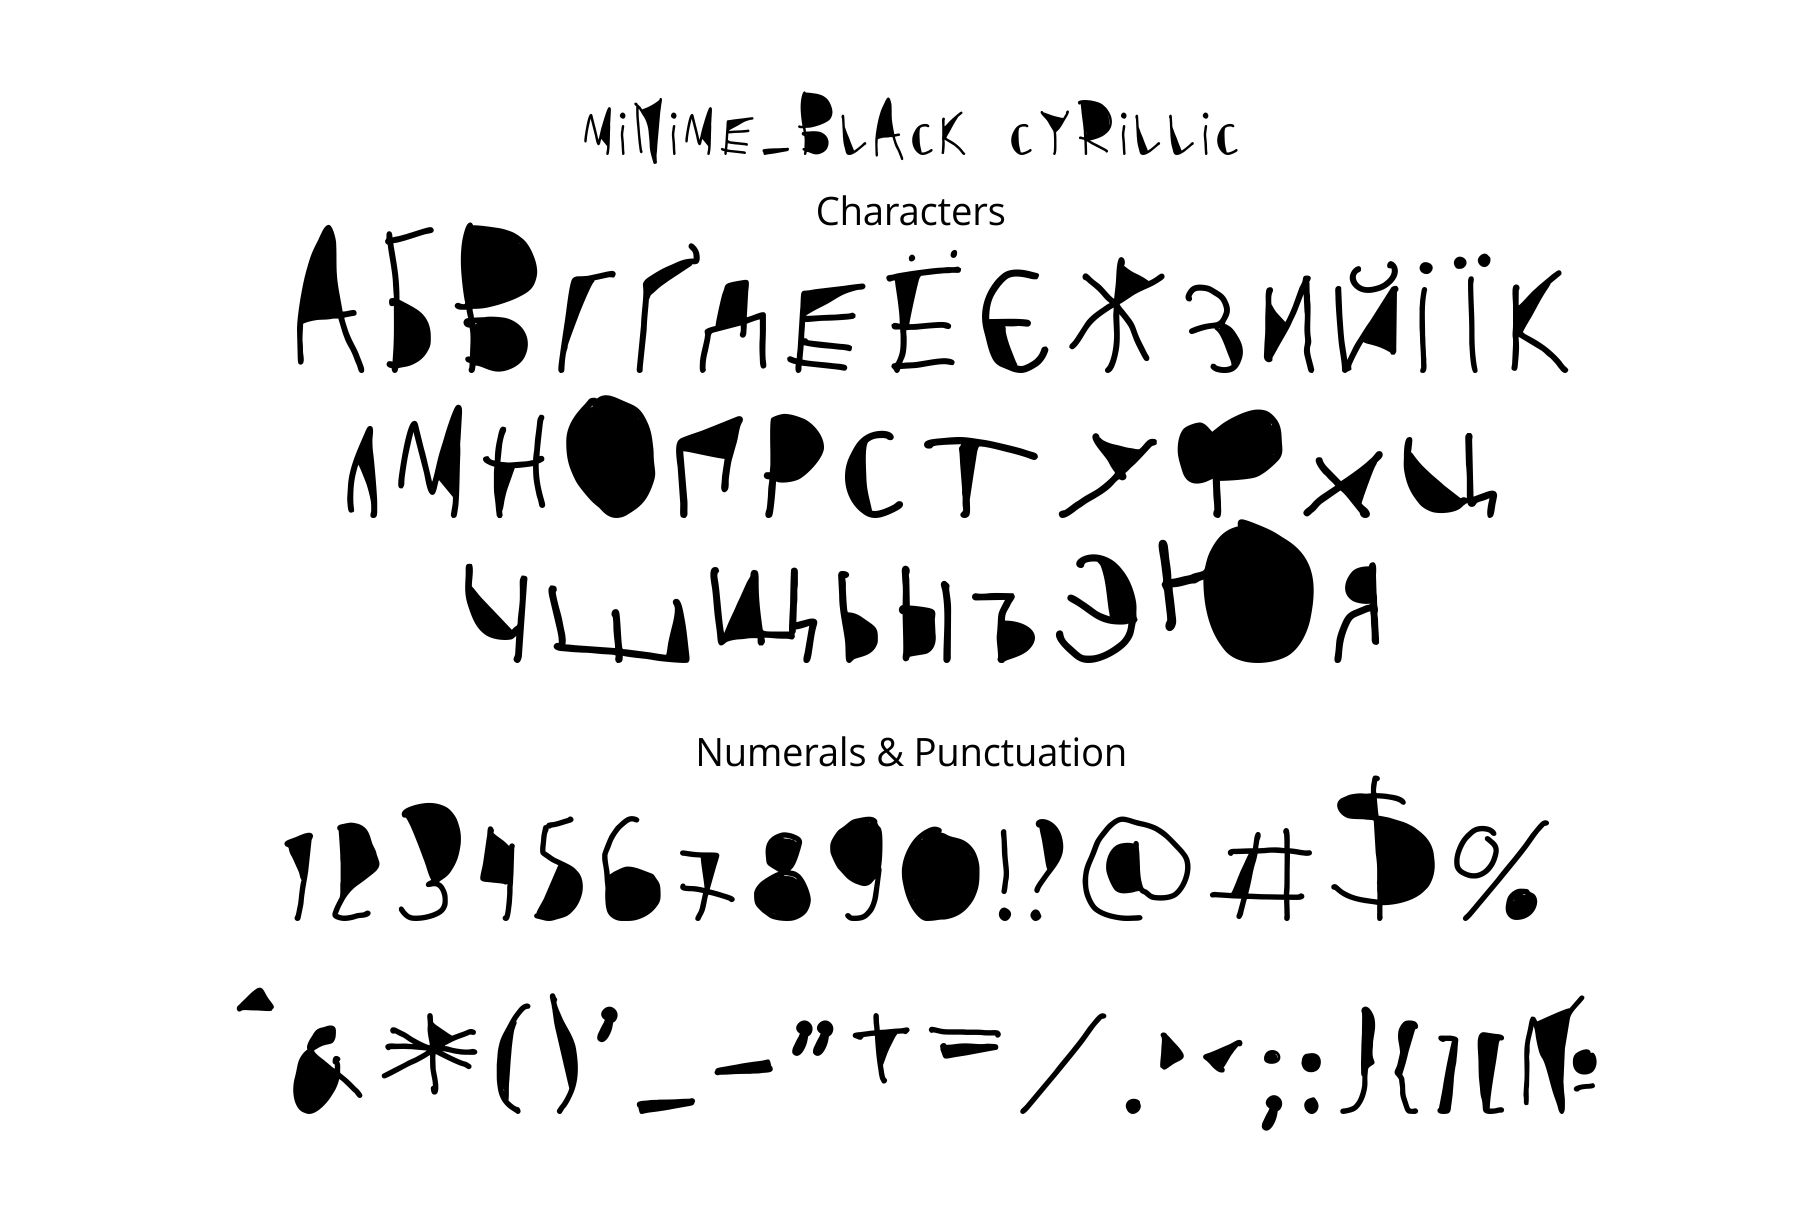 Cyrillic letters in classic version with numerals & punctuation.